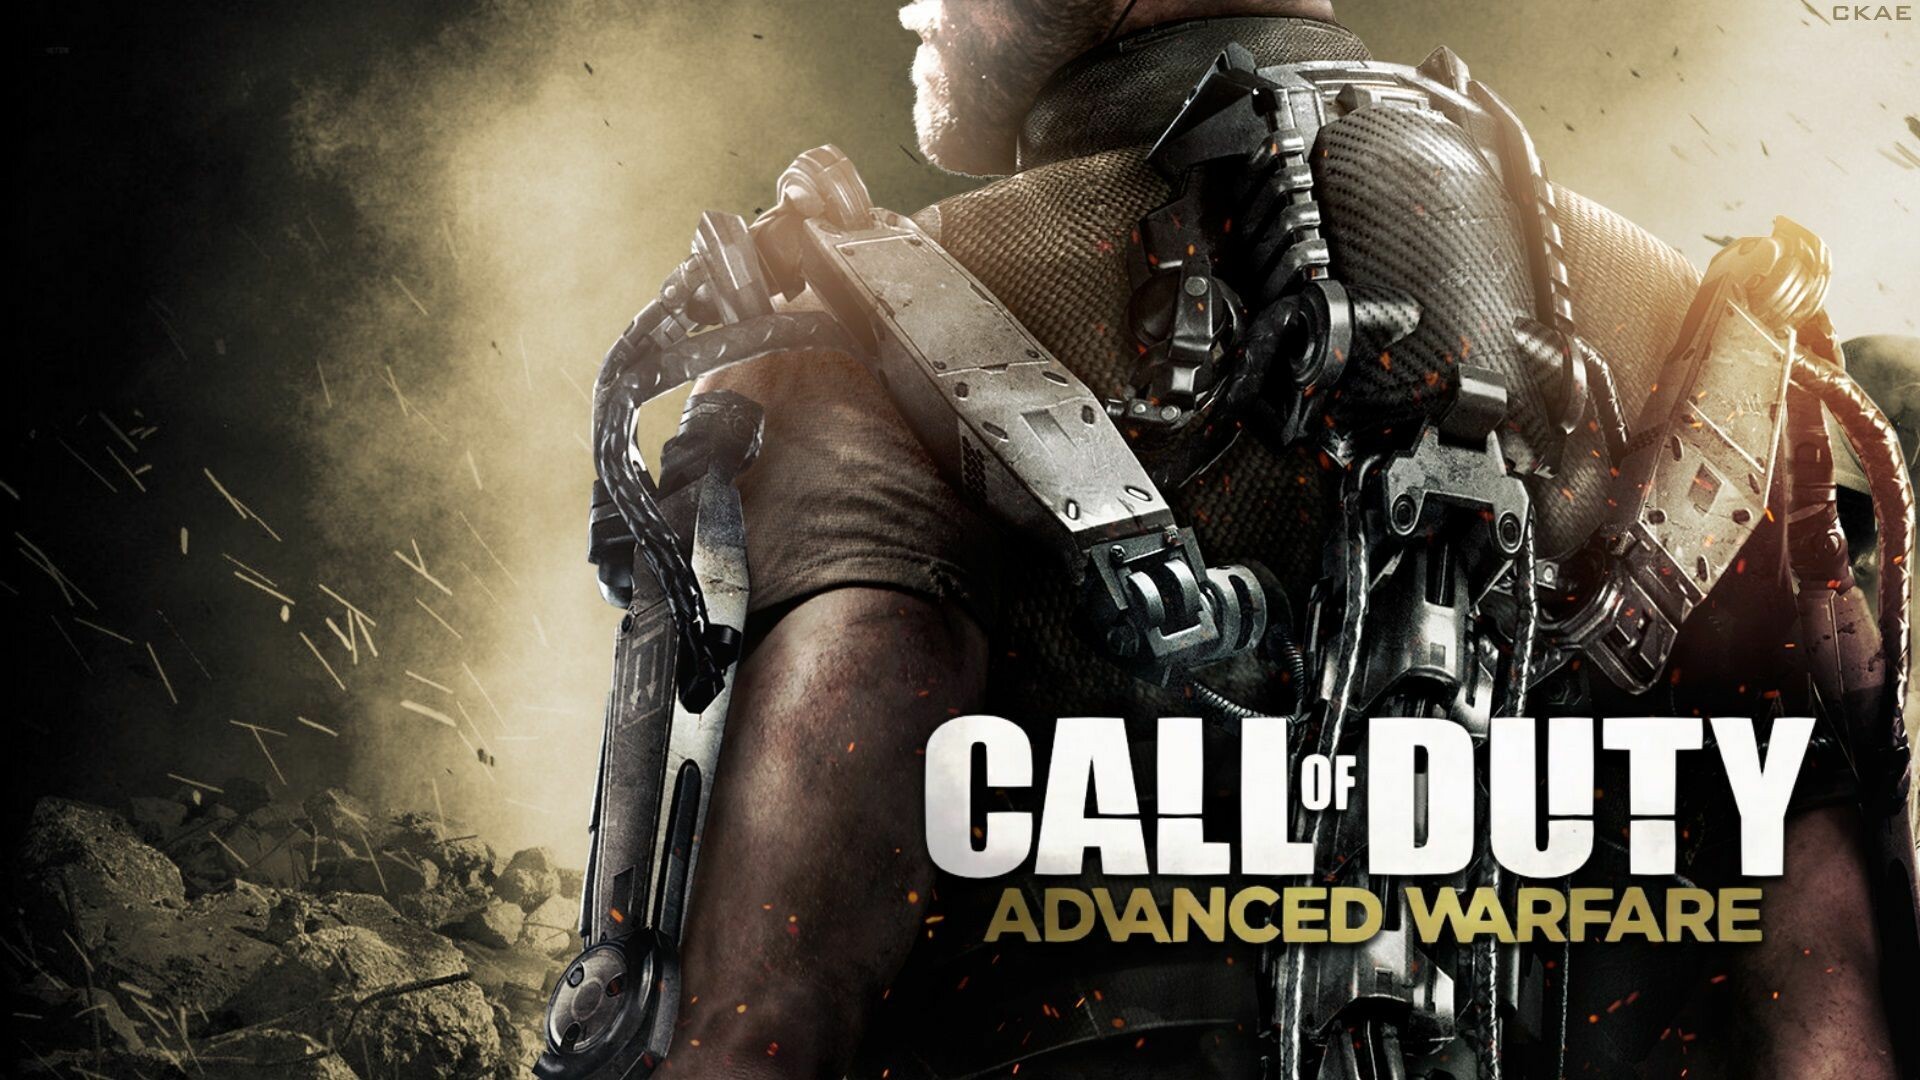 52+ Cool Call of Duty Wallpapers: HD, 4K, 5K for PC and Mobile | Download  free images for iPhone, Android